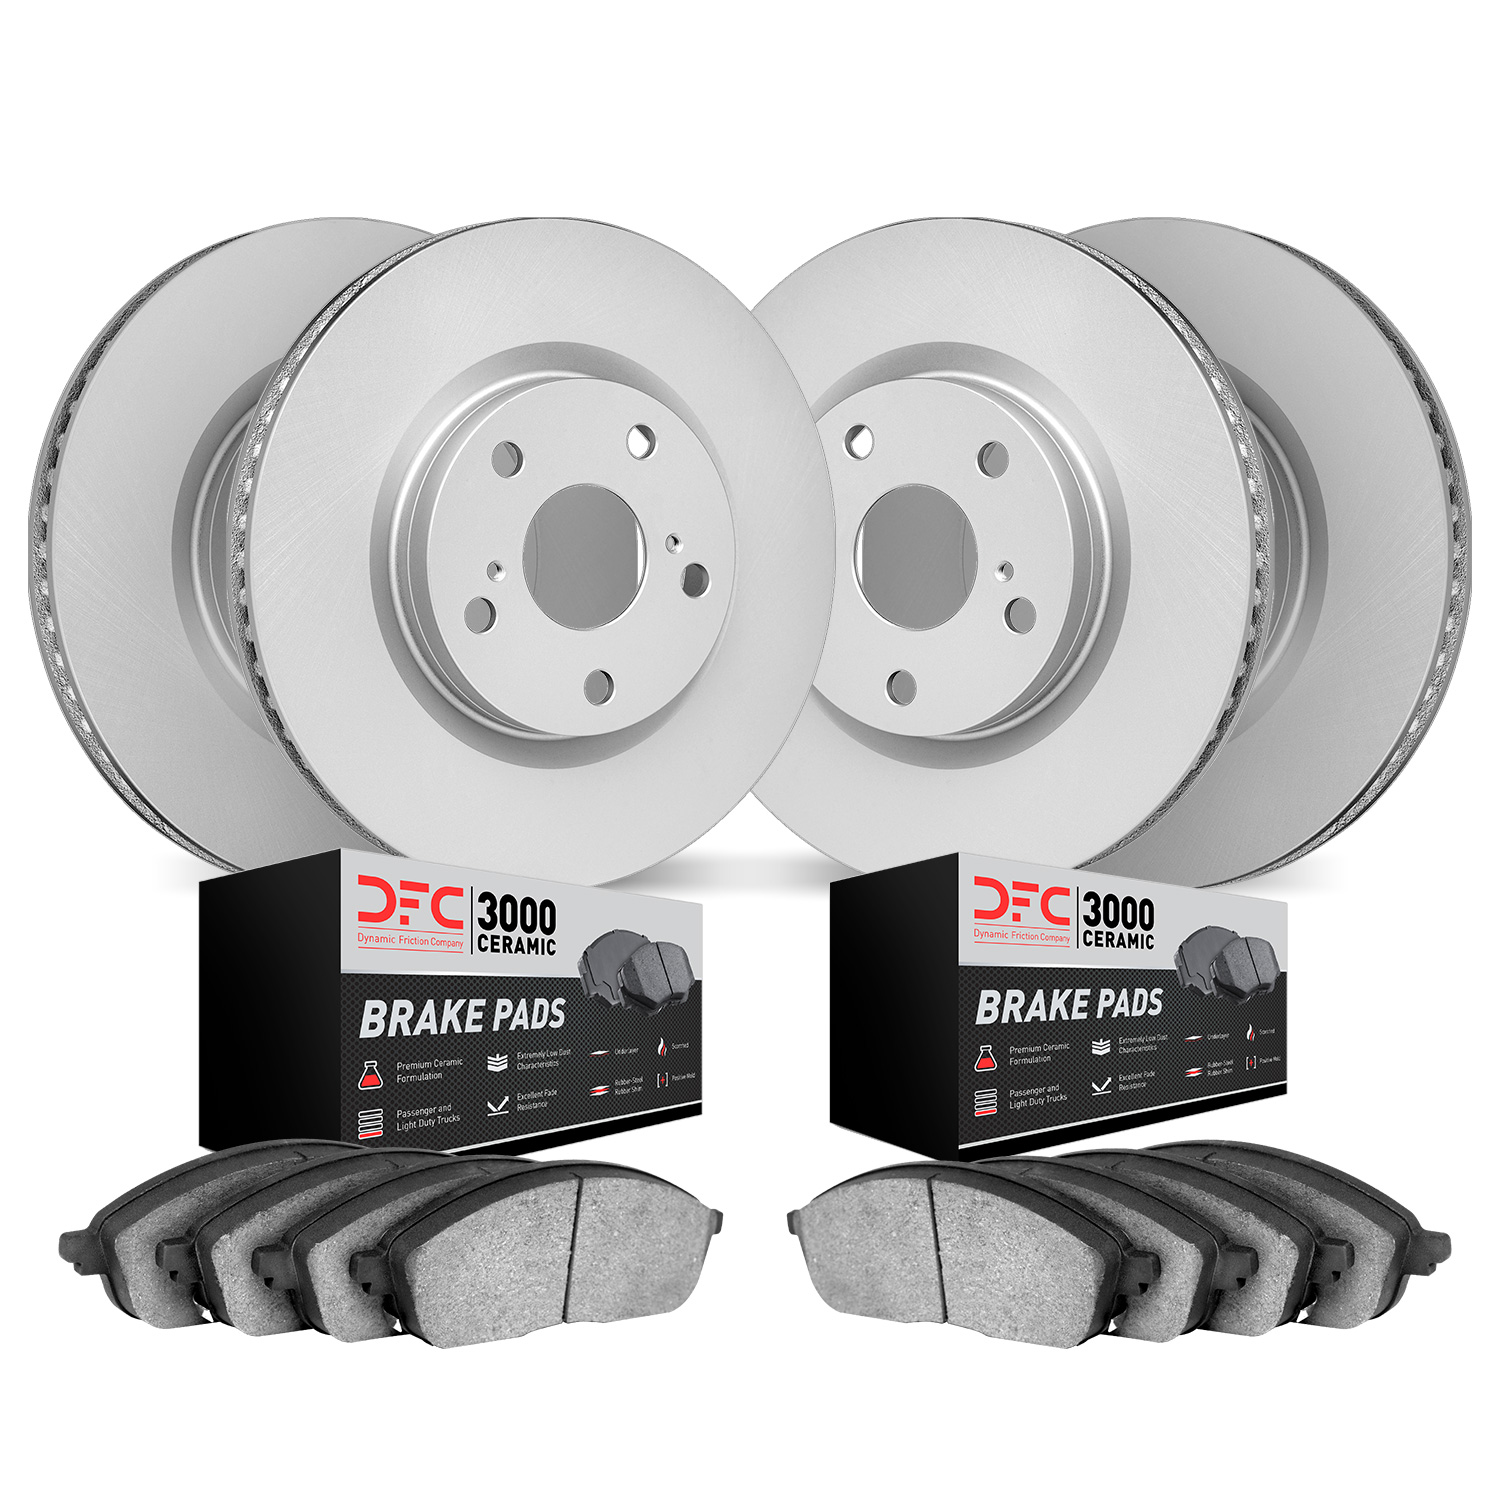 4304-73042 Geospec Brake Rotors with 3000-Series Ceramic Brake Pads Kit, 2012-2018 Audi/Volkswagen, Position: Front and Rear